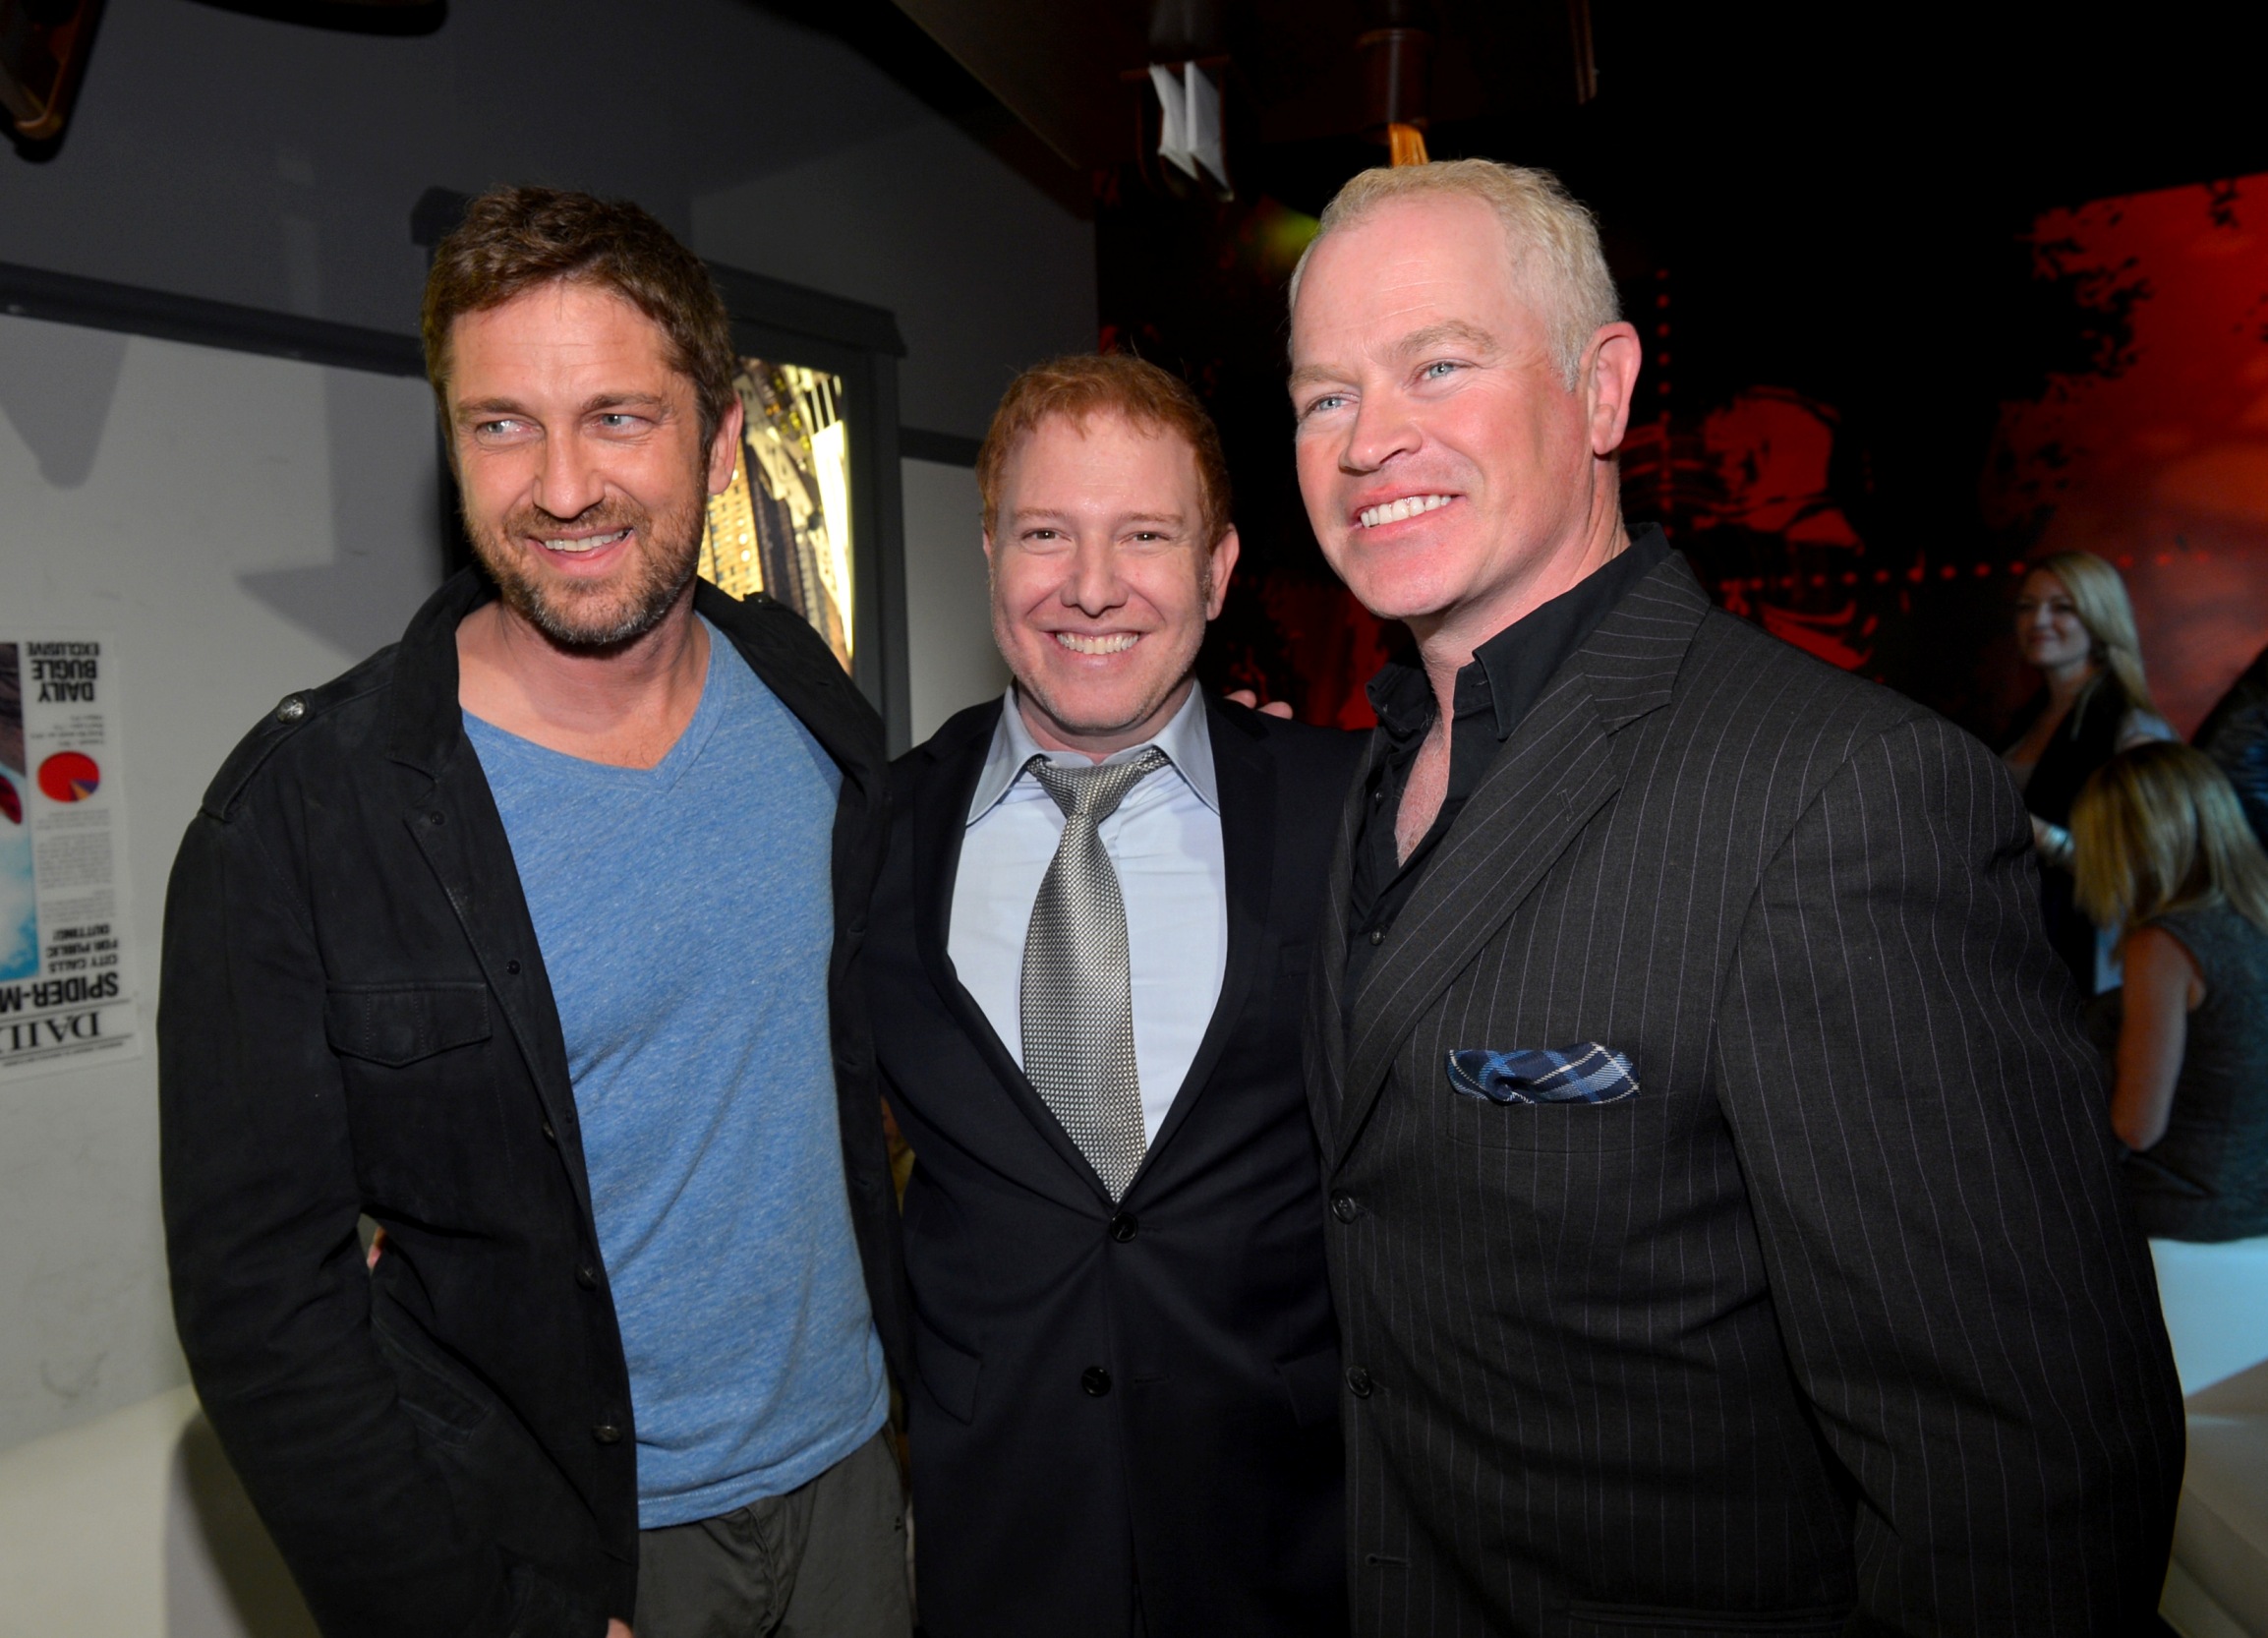 HOLLYWOOD, CA - JANUARY 23:  (L-R) Actor Gerard, Relativity Media CEO Ryan Kavanaugh and actor Neal McDonough attend Relativity Media's "Movie 43" Los Angeles Premiere After Party on January 23, 2013 in Hollywood, California.  (Photo by Alberto E. Rodriguez/Getty Images For Relativity Media)